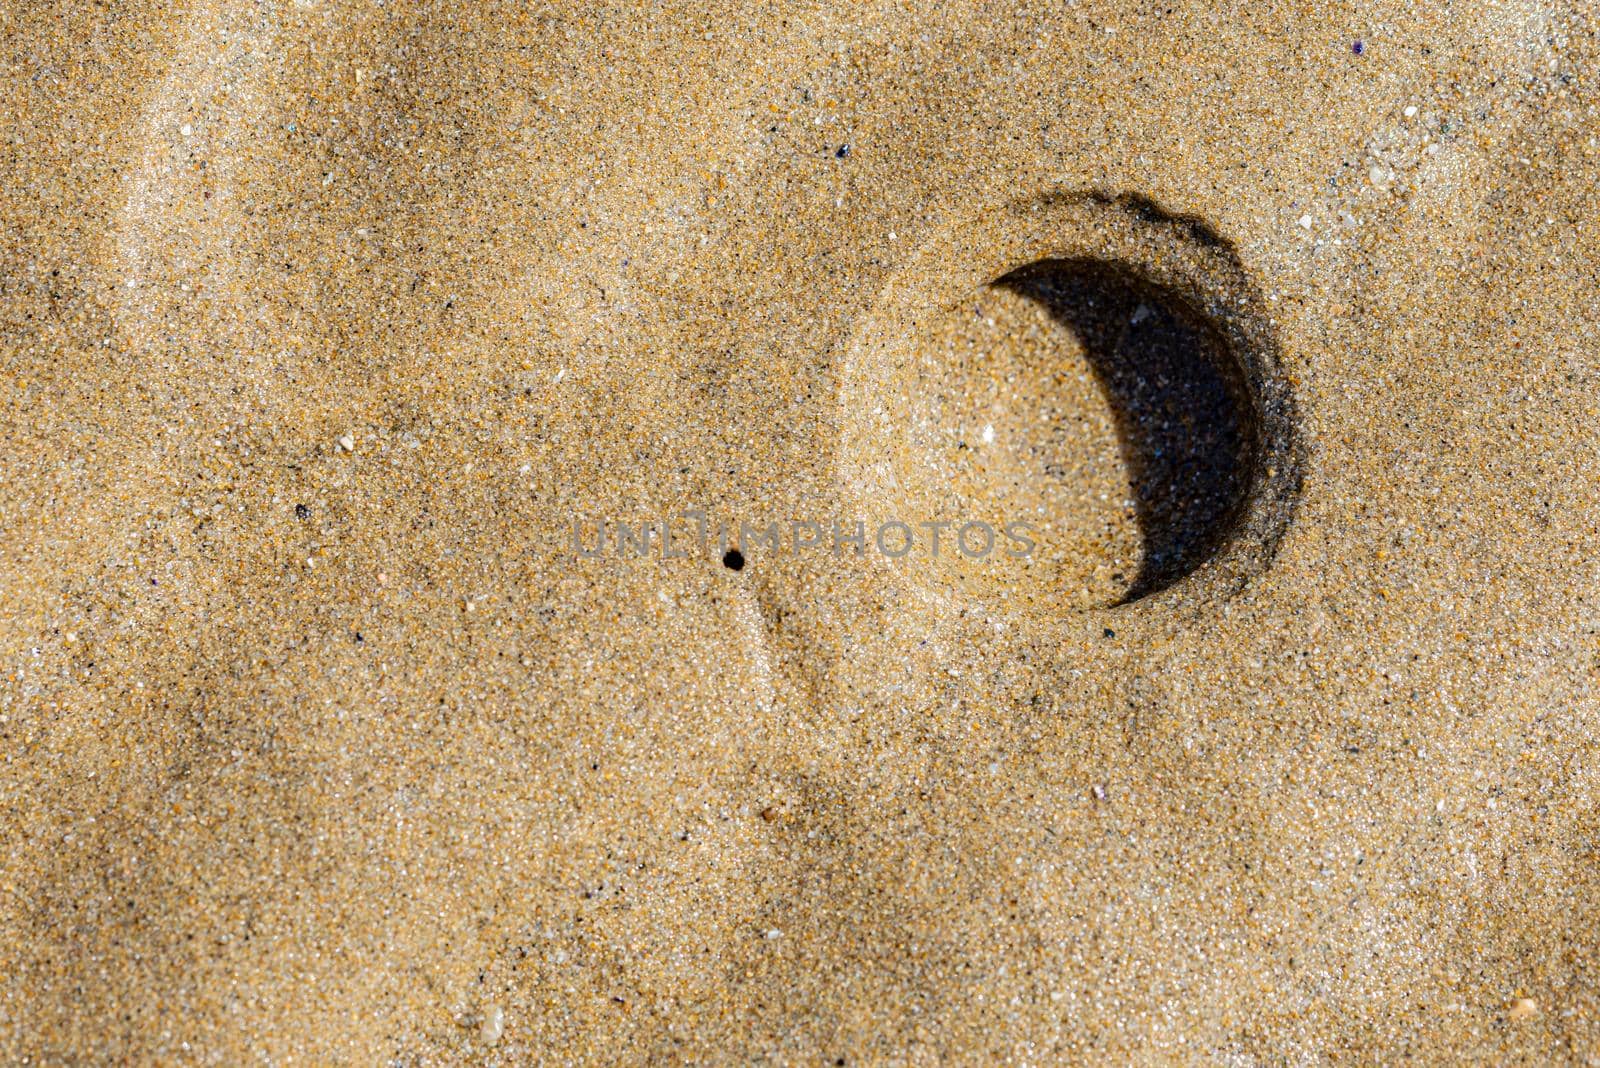 Holes of Solen Marginatus, also known as Grooved Razor Shell, Cannolicchio or Cappalunga, in the sand of the beach on the Italian Adriatic coast